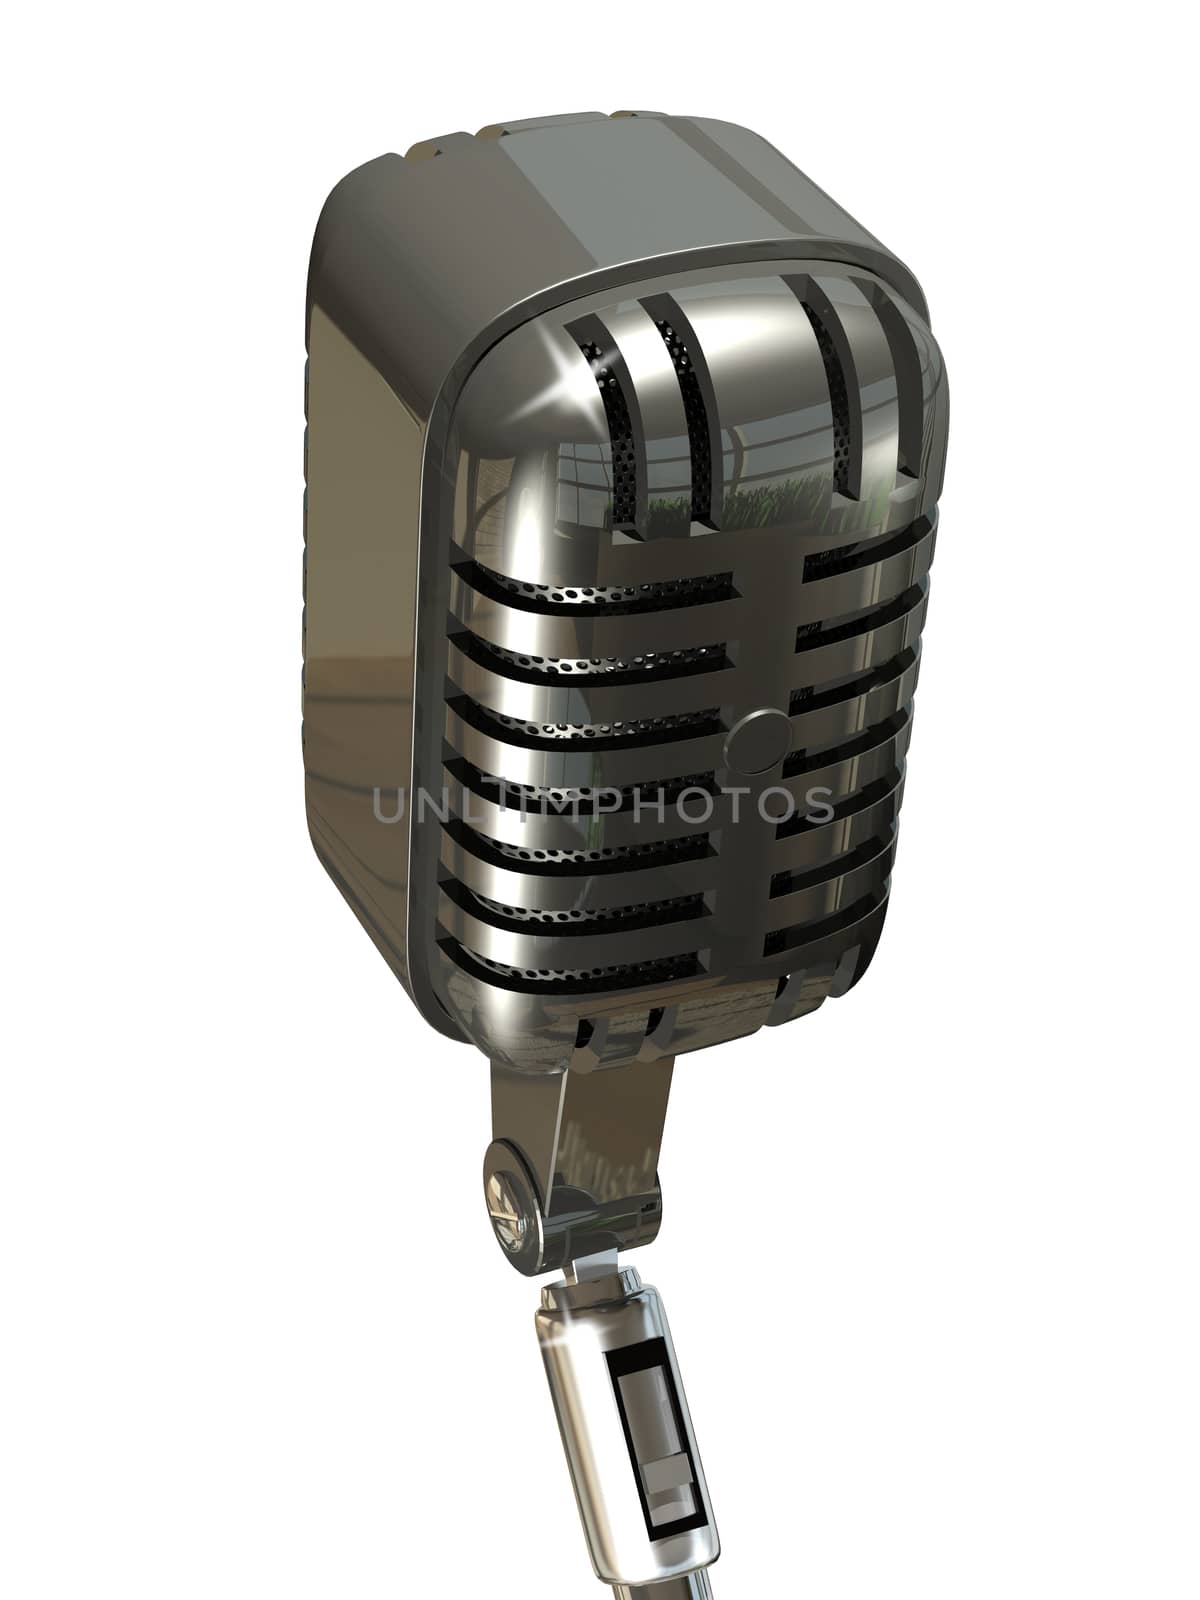 Illustration of a Microphone on a White Background